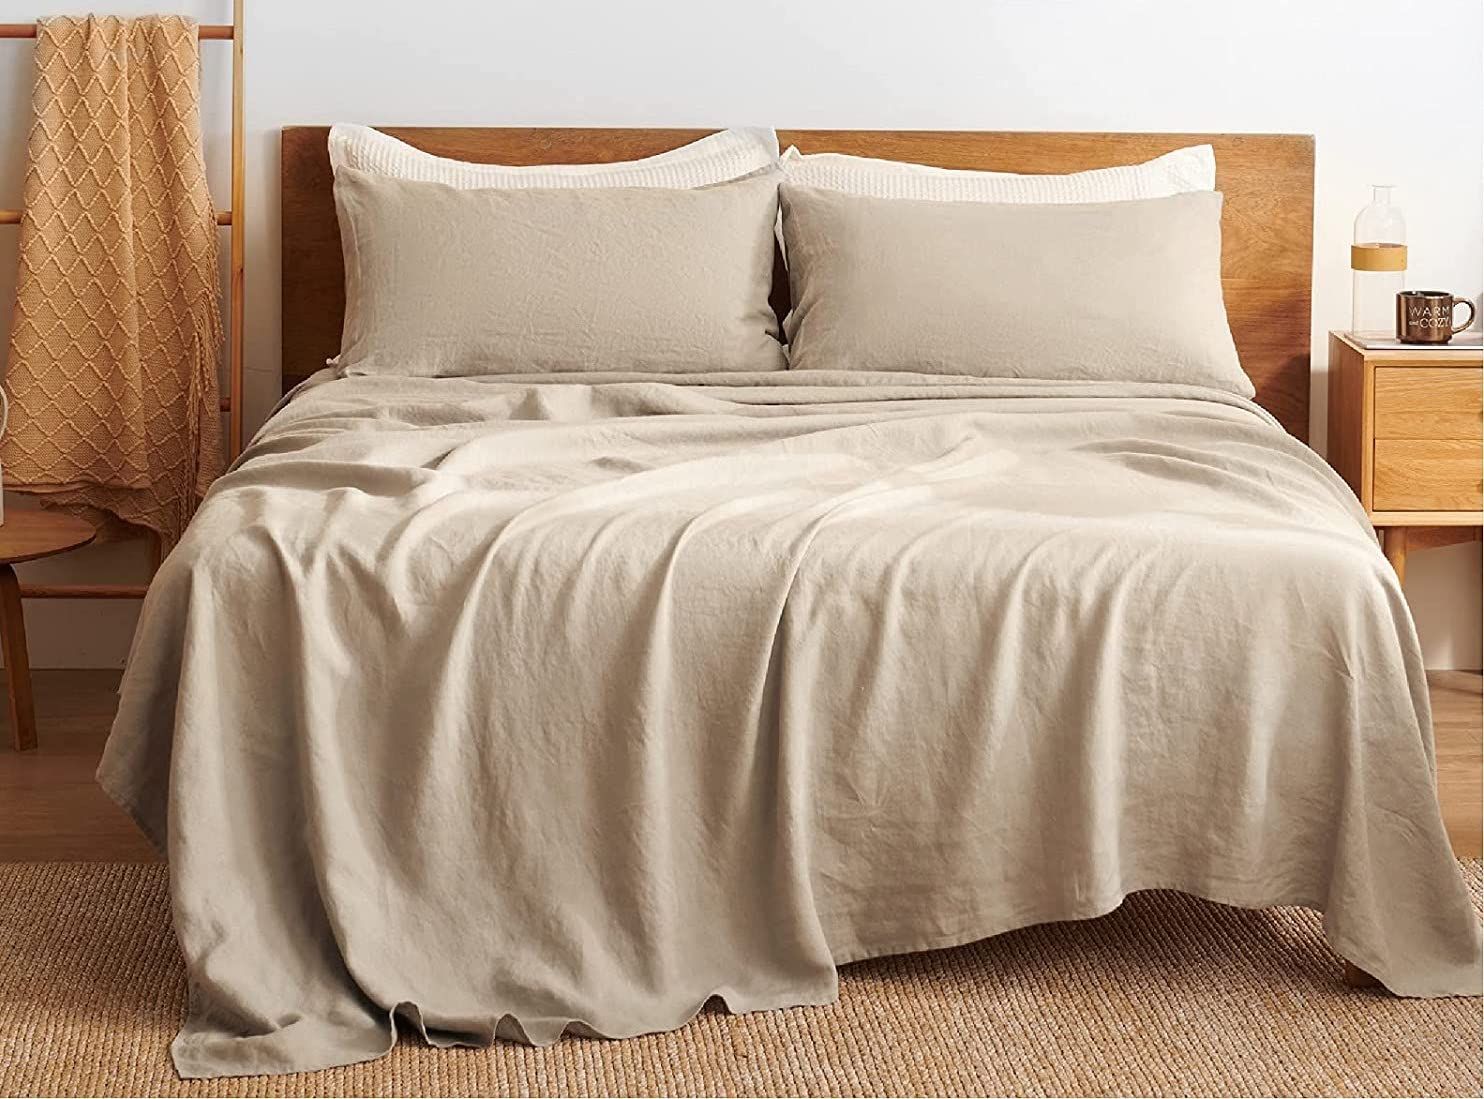 {bestsheets} - bed| feel| sets| material| colors| thread| bedding| mattress| linen| bamboo| sizes| king| pillowcases| weave| quality| options| night| twin| inches| sleepers| percale| color| people| mattresses| price| home| notes| silk| brooklinen| option| reviews| skin| fibers| product| thread count| fitted sheet| linen sheets| flat sheet| sateen sheets| egyptian cotton| bed sheets| sateen weave| ooler| lab notes| organic cotton| percale sheets| sleep trial| sheet set| hot sleepers| cotton sheets| percale sheet| sheet sets| bamboo sheets| sateen sheet| free shipping| sensitive skin| pocket depth| long-staple cotton| color options| bamboo sheet| flannel sheets| linen sheet| california king| sleepfoundation.org link| current discount